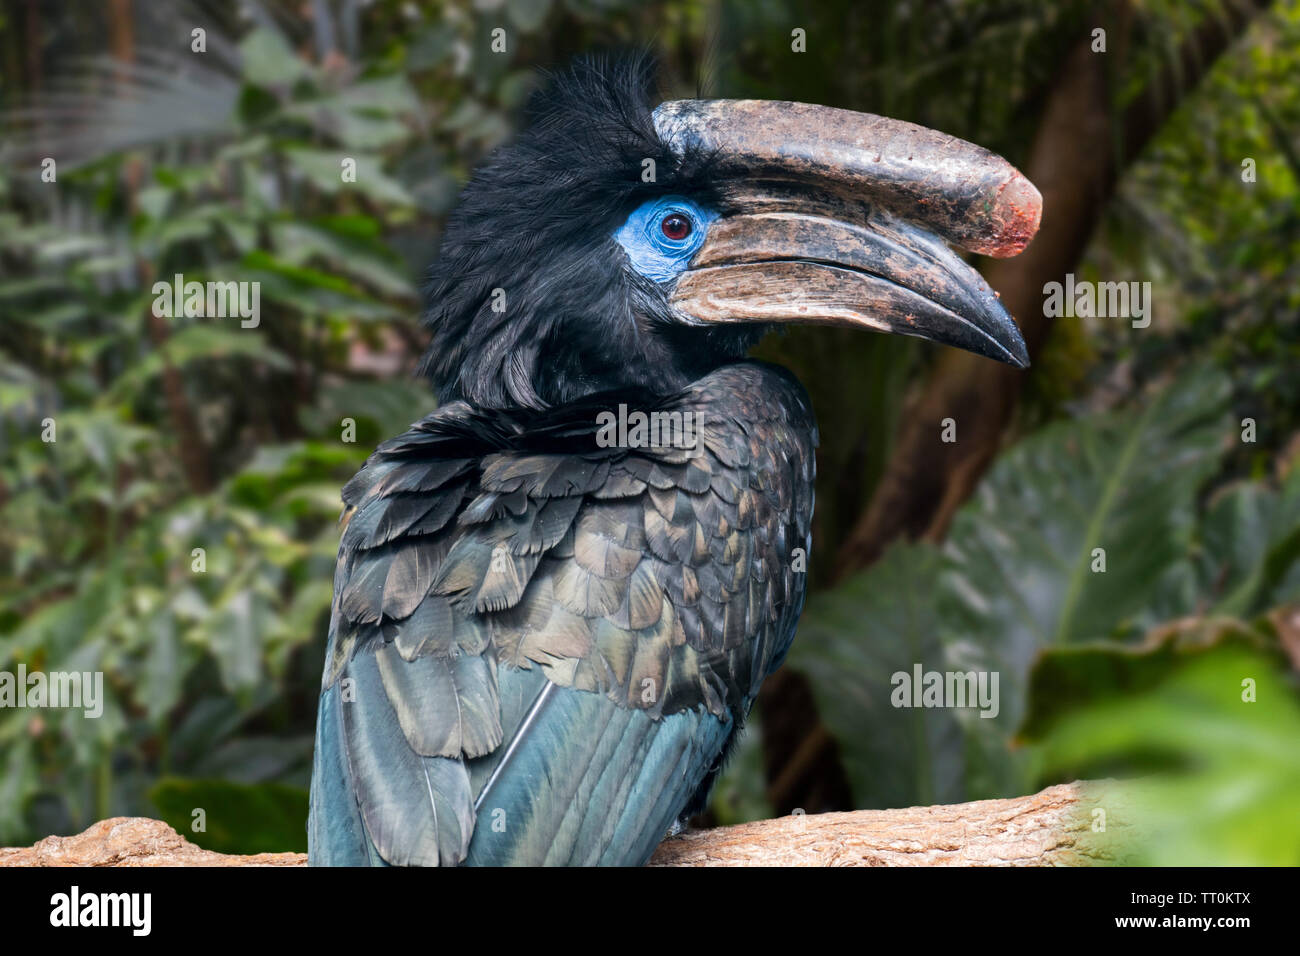 Black-casqued hornbill / black-casqued wattled hornbill (Ceratogymna atrata) male perched in tree, native to Africa Stock Photo